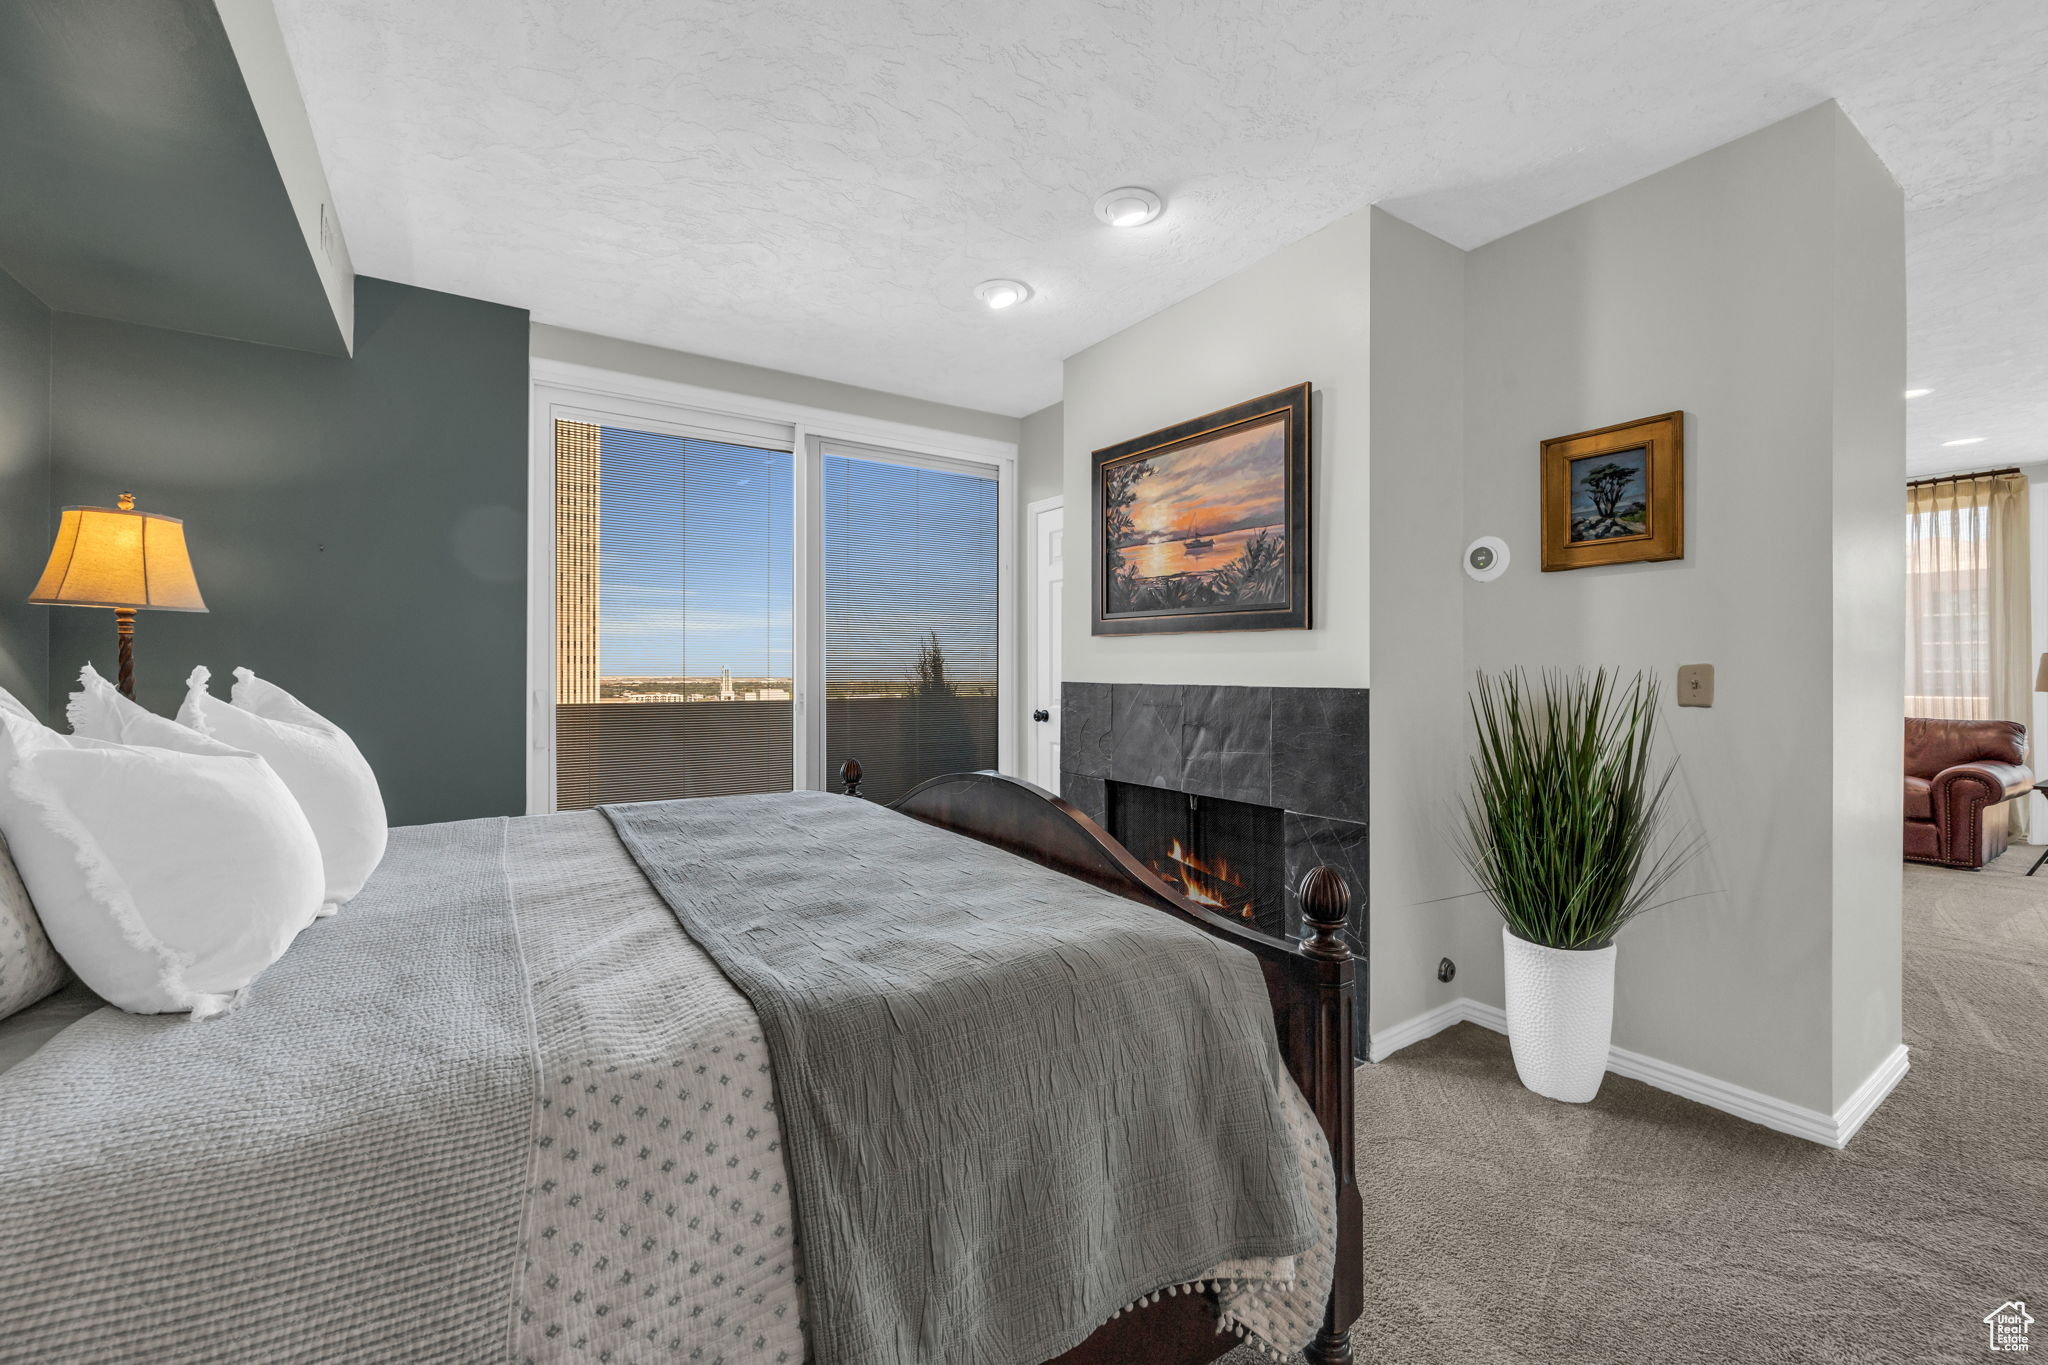 Bedroom with on-suite bathroom , carpet flooring, a fireplace, floor-to-ceiling windows, and access to an exterior balcony overlooking downtown and the west sunset